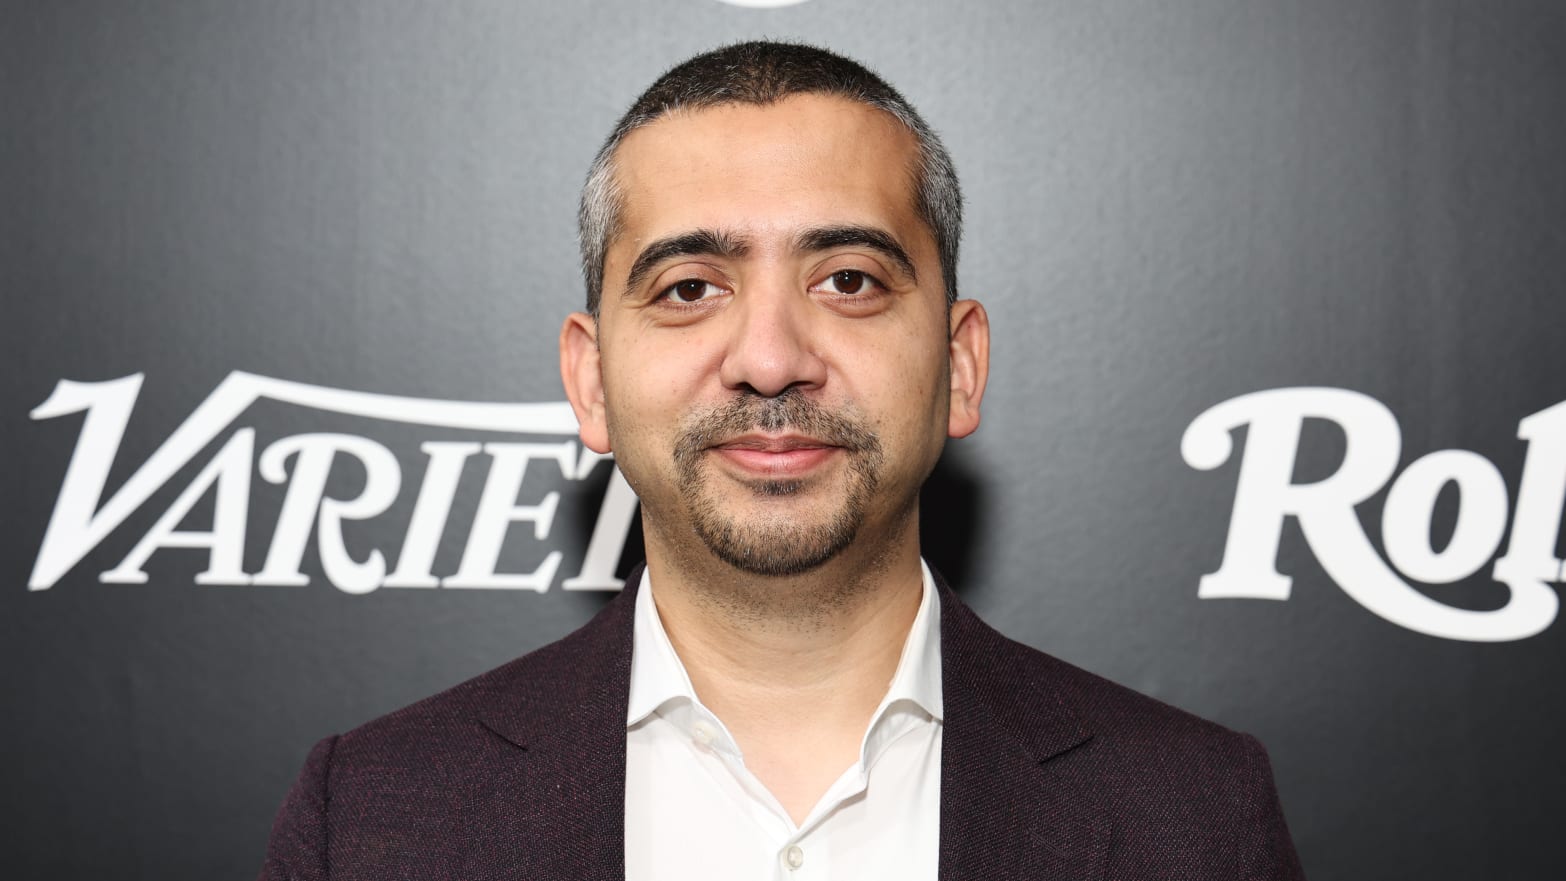 Mehdi Hasan attends Variety & Rolling Stone Truth Seekers Summit